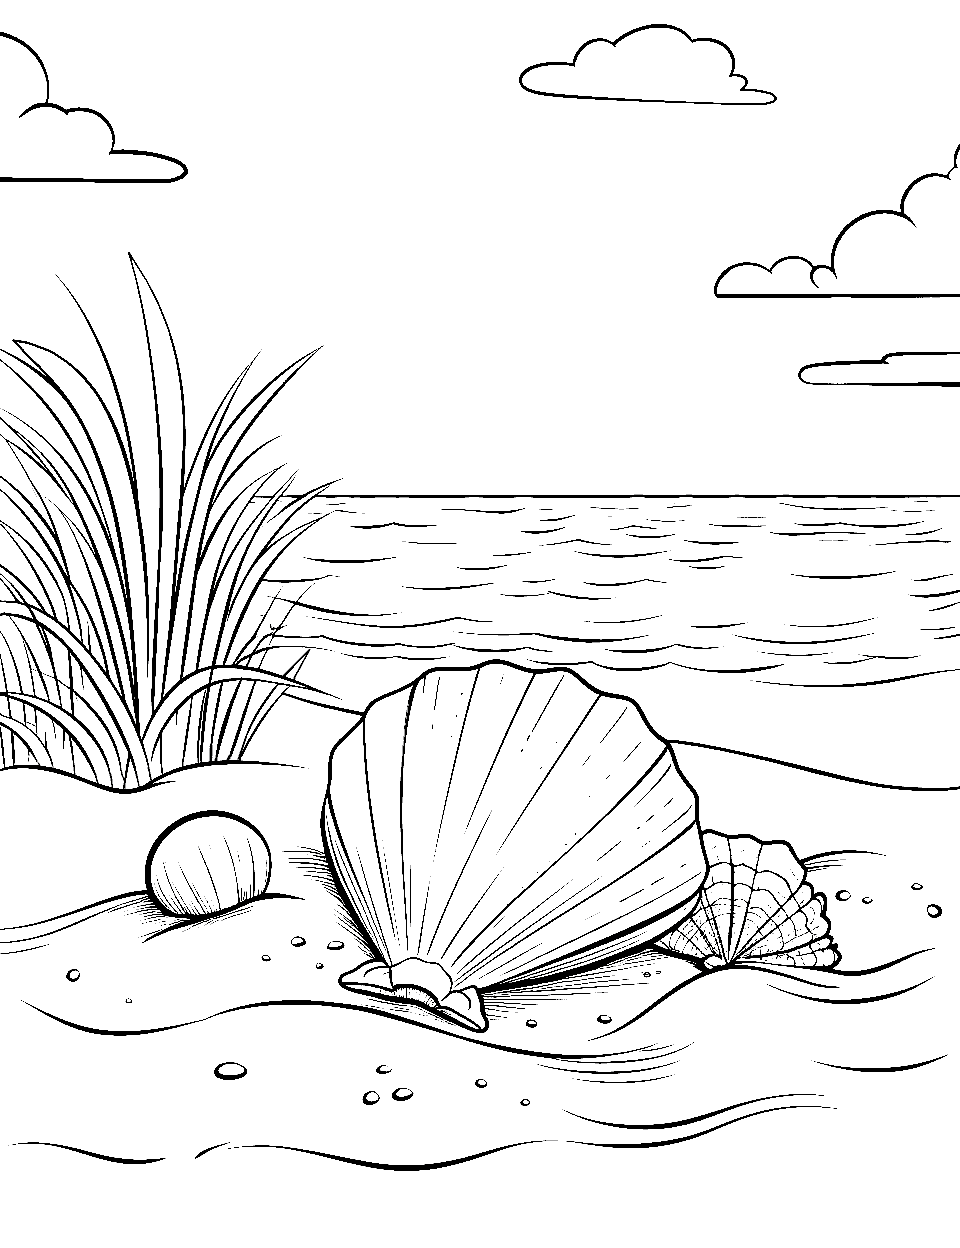 Simple Seashell in Sand Coloring Page - Detailed seashell lying in soft, smooth beach sand.